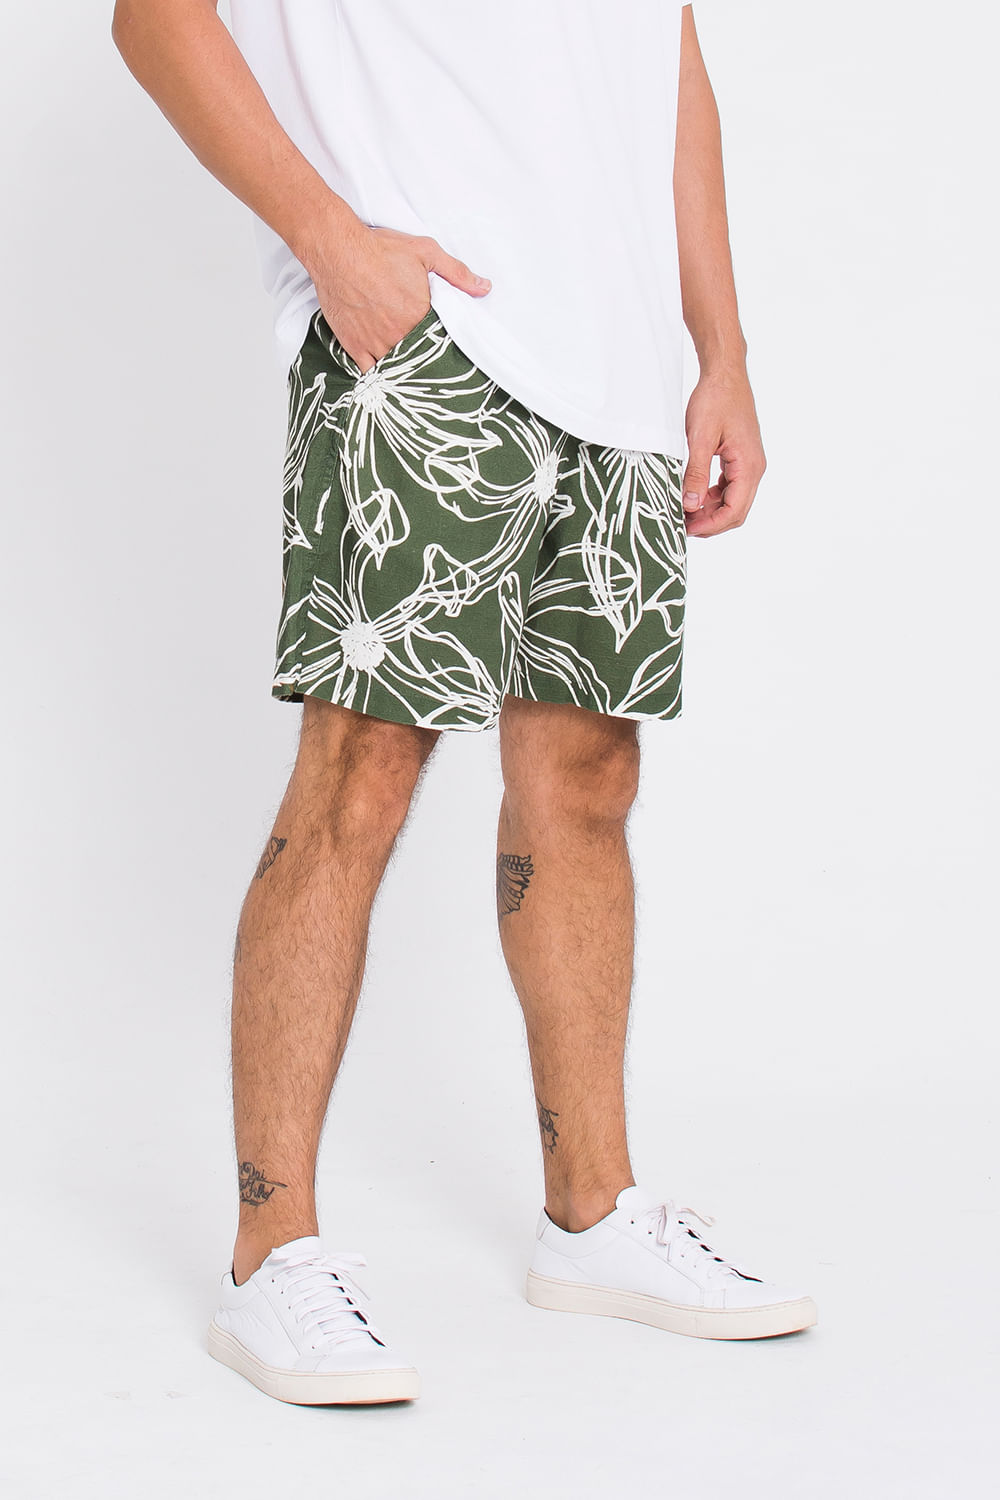 Short-Pachamama-Verde-Lateral